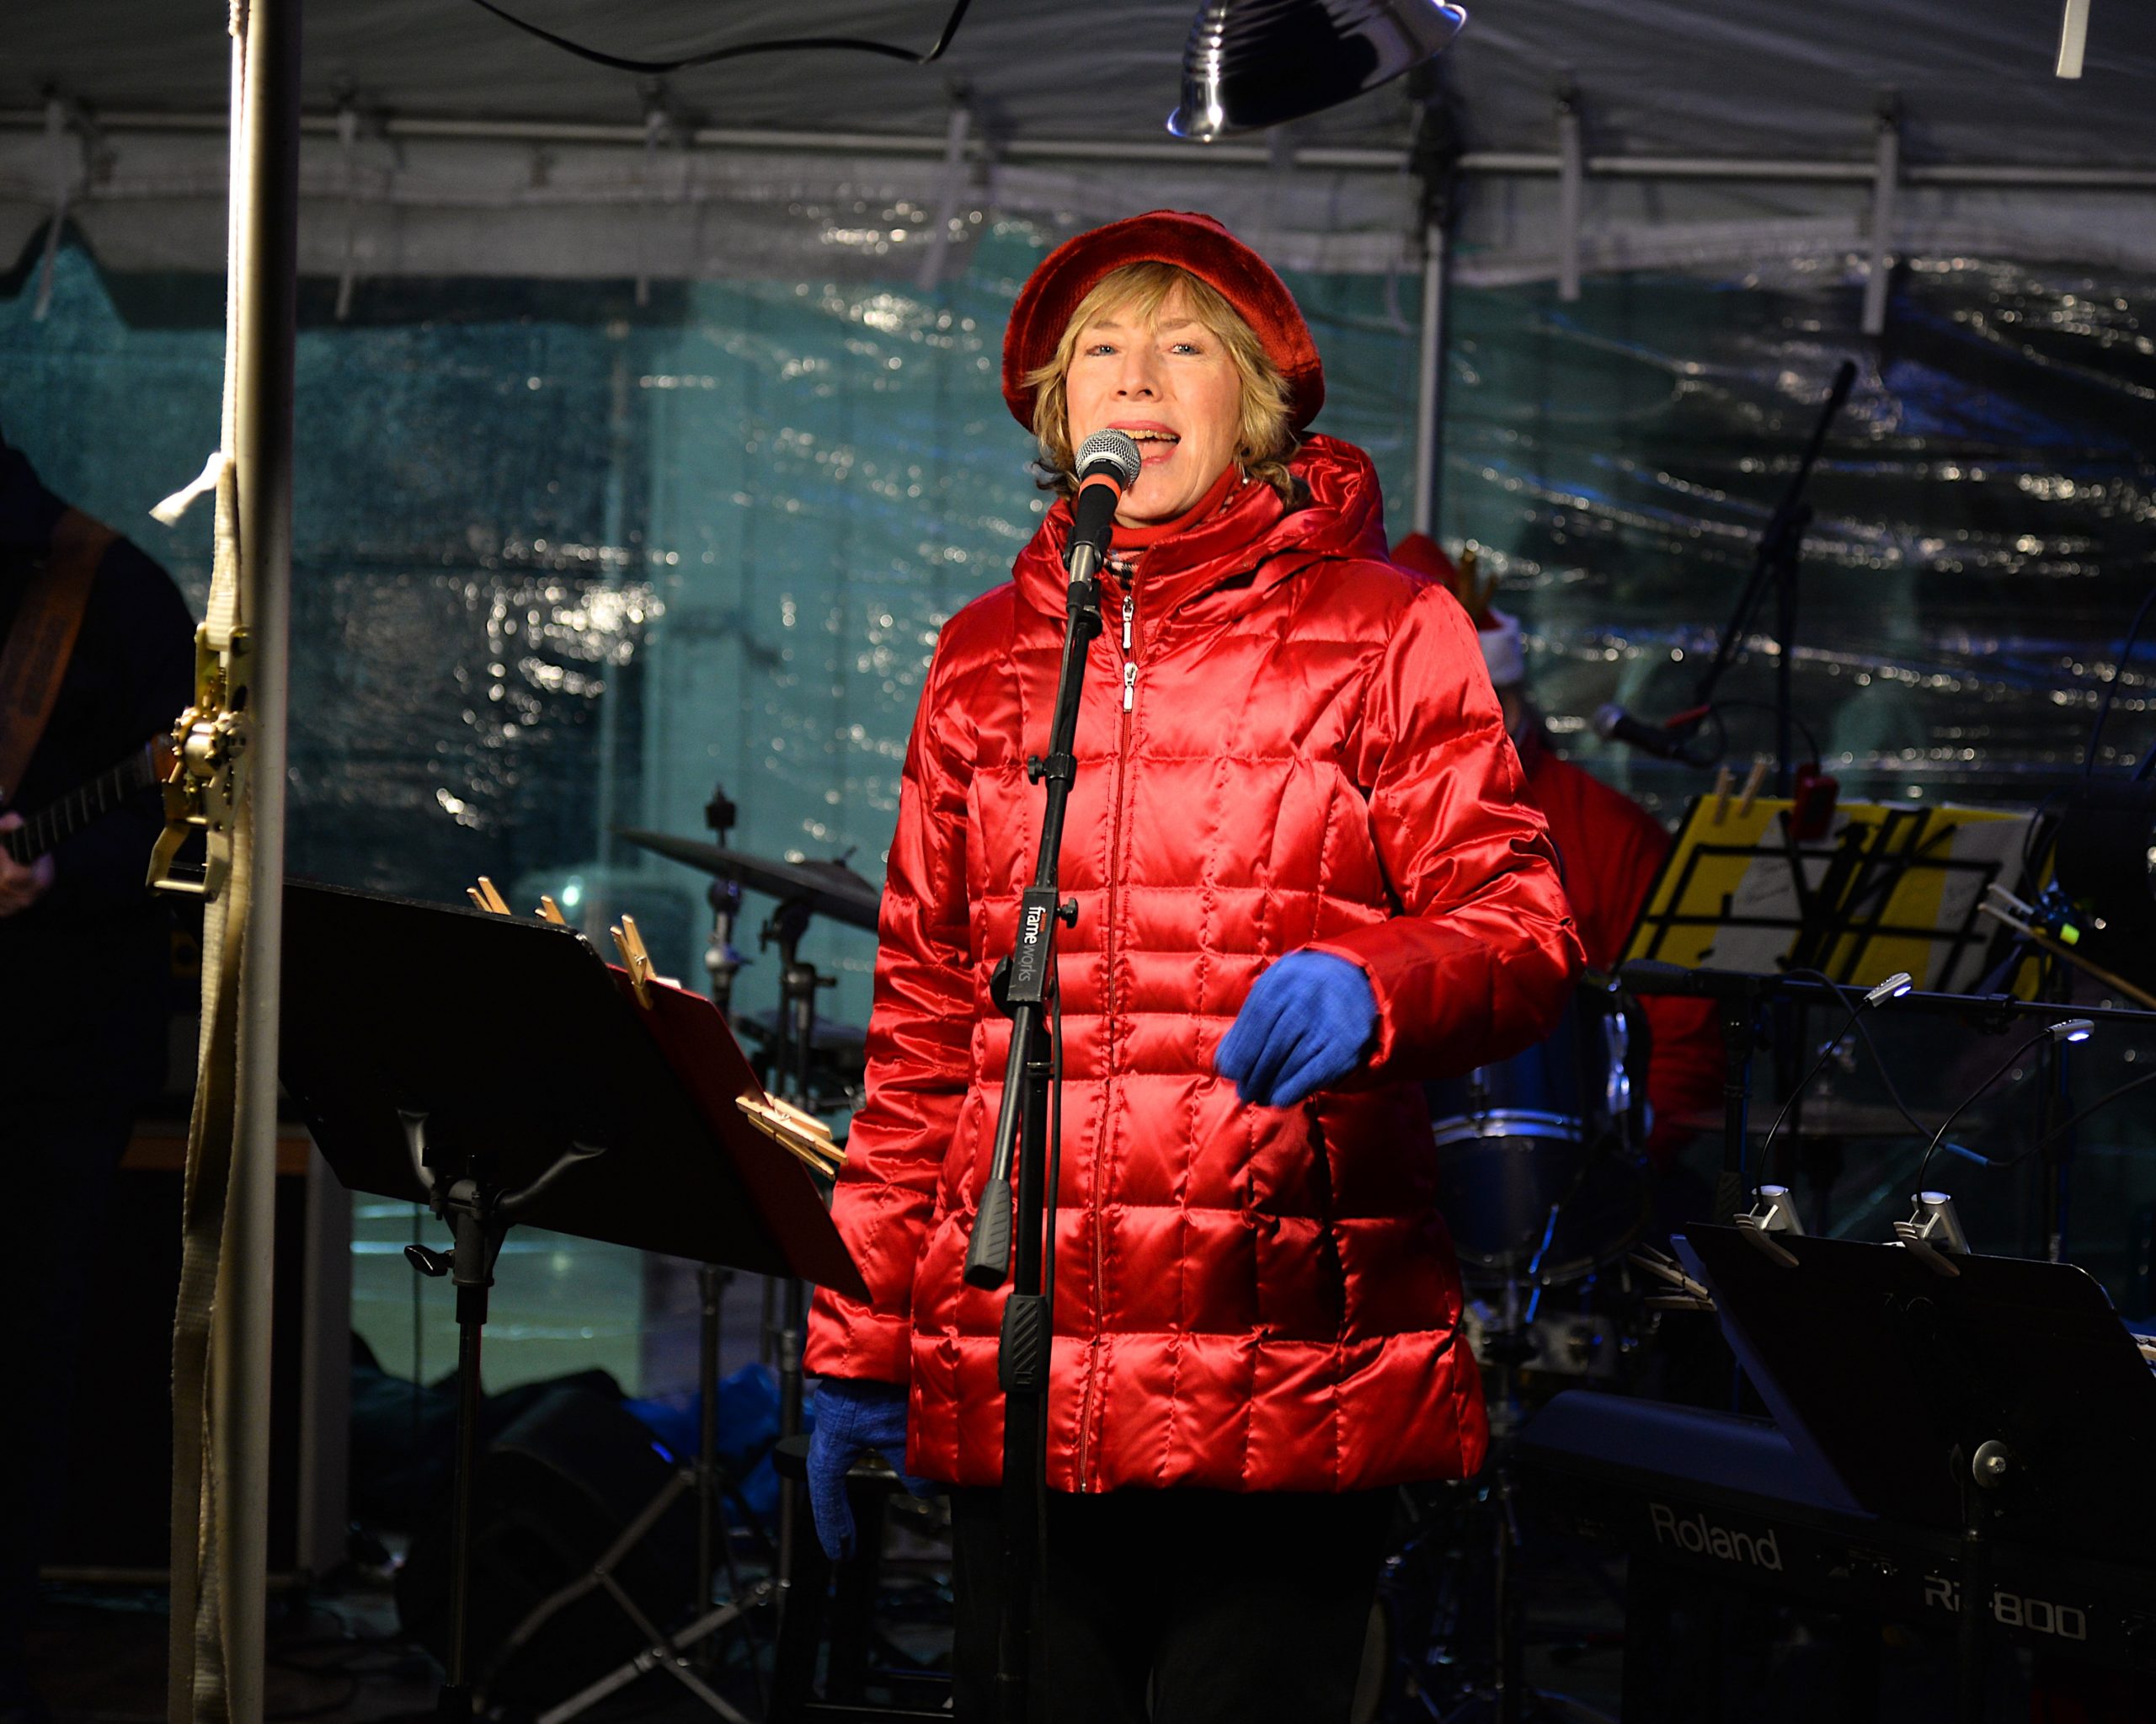 The Montauk Lighthouse was lit for the season on Saturday. Sara Conway and the Playful Souls warmed the crowd with Christmas carols. KYRIL BROMLEY